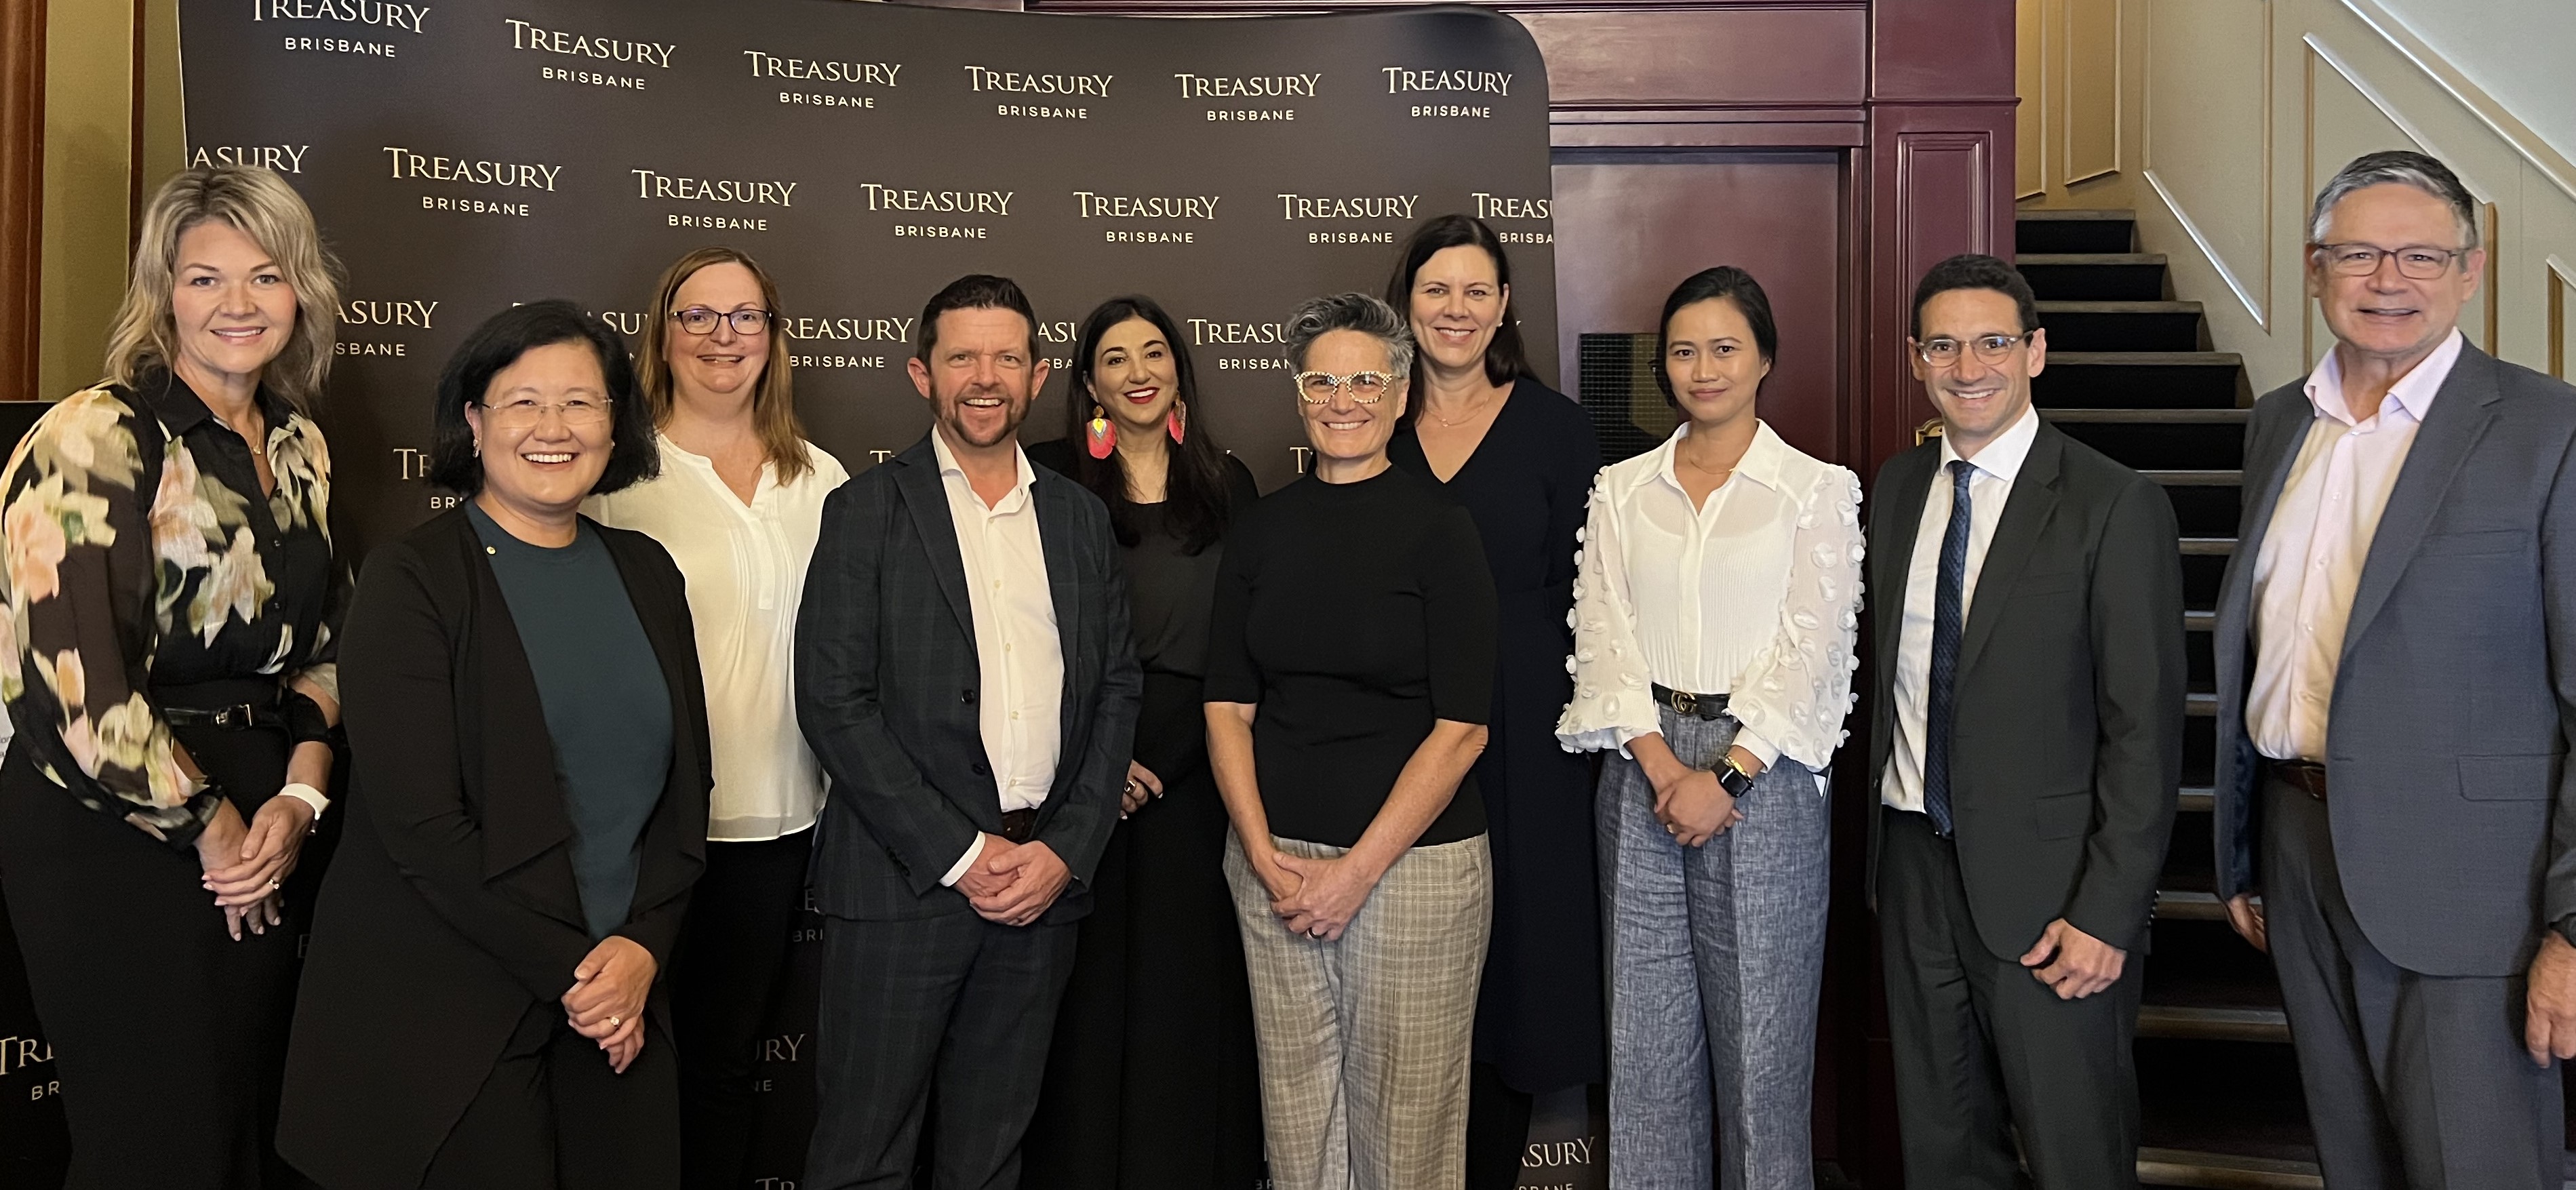 Company and organisation leaders pose for a photo in front of a banner with the words Treasury Brisbane on it. The people are wearing business attire and smiling.